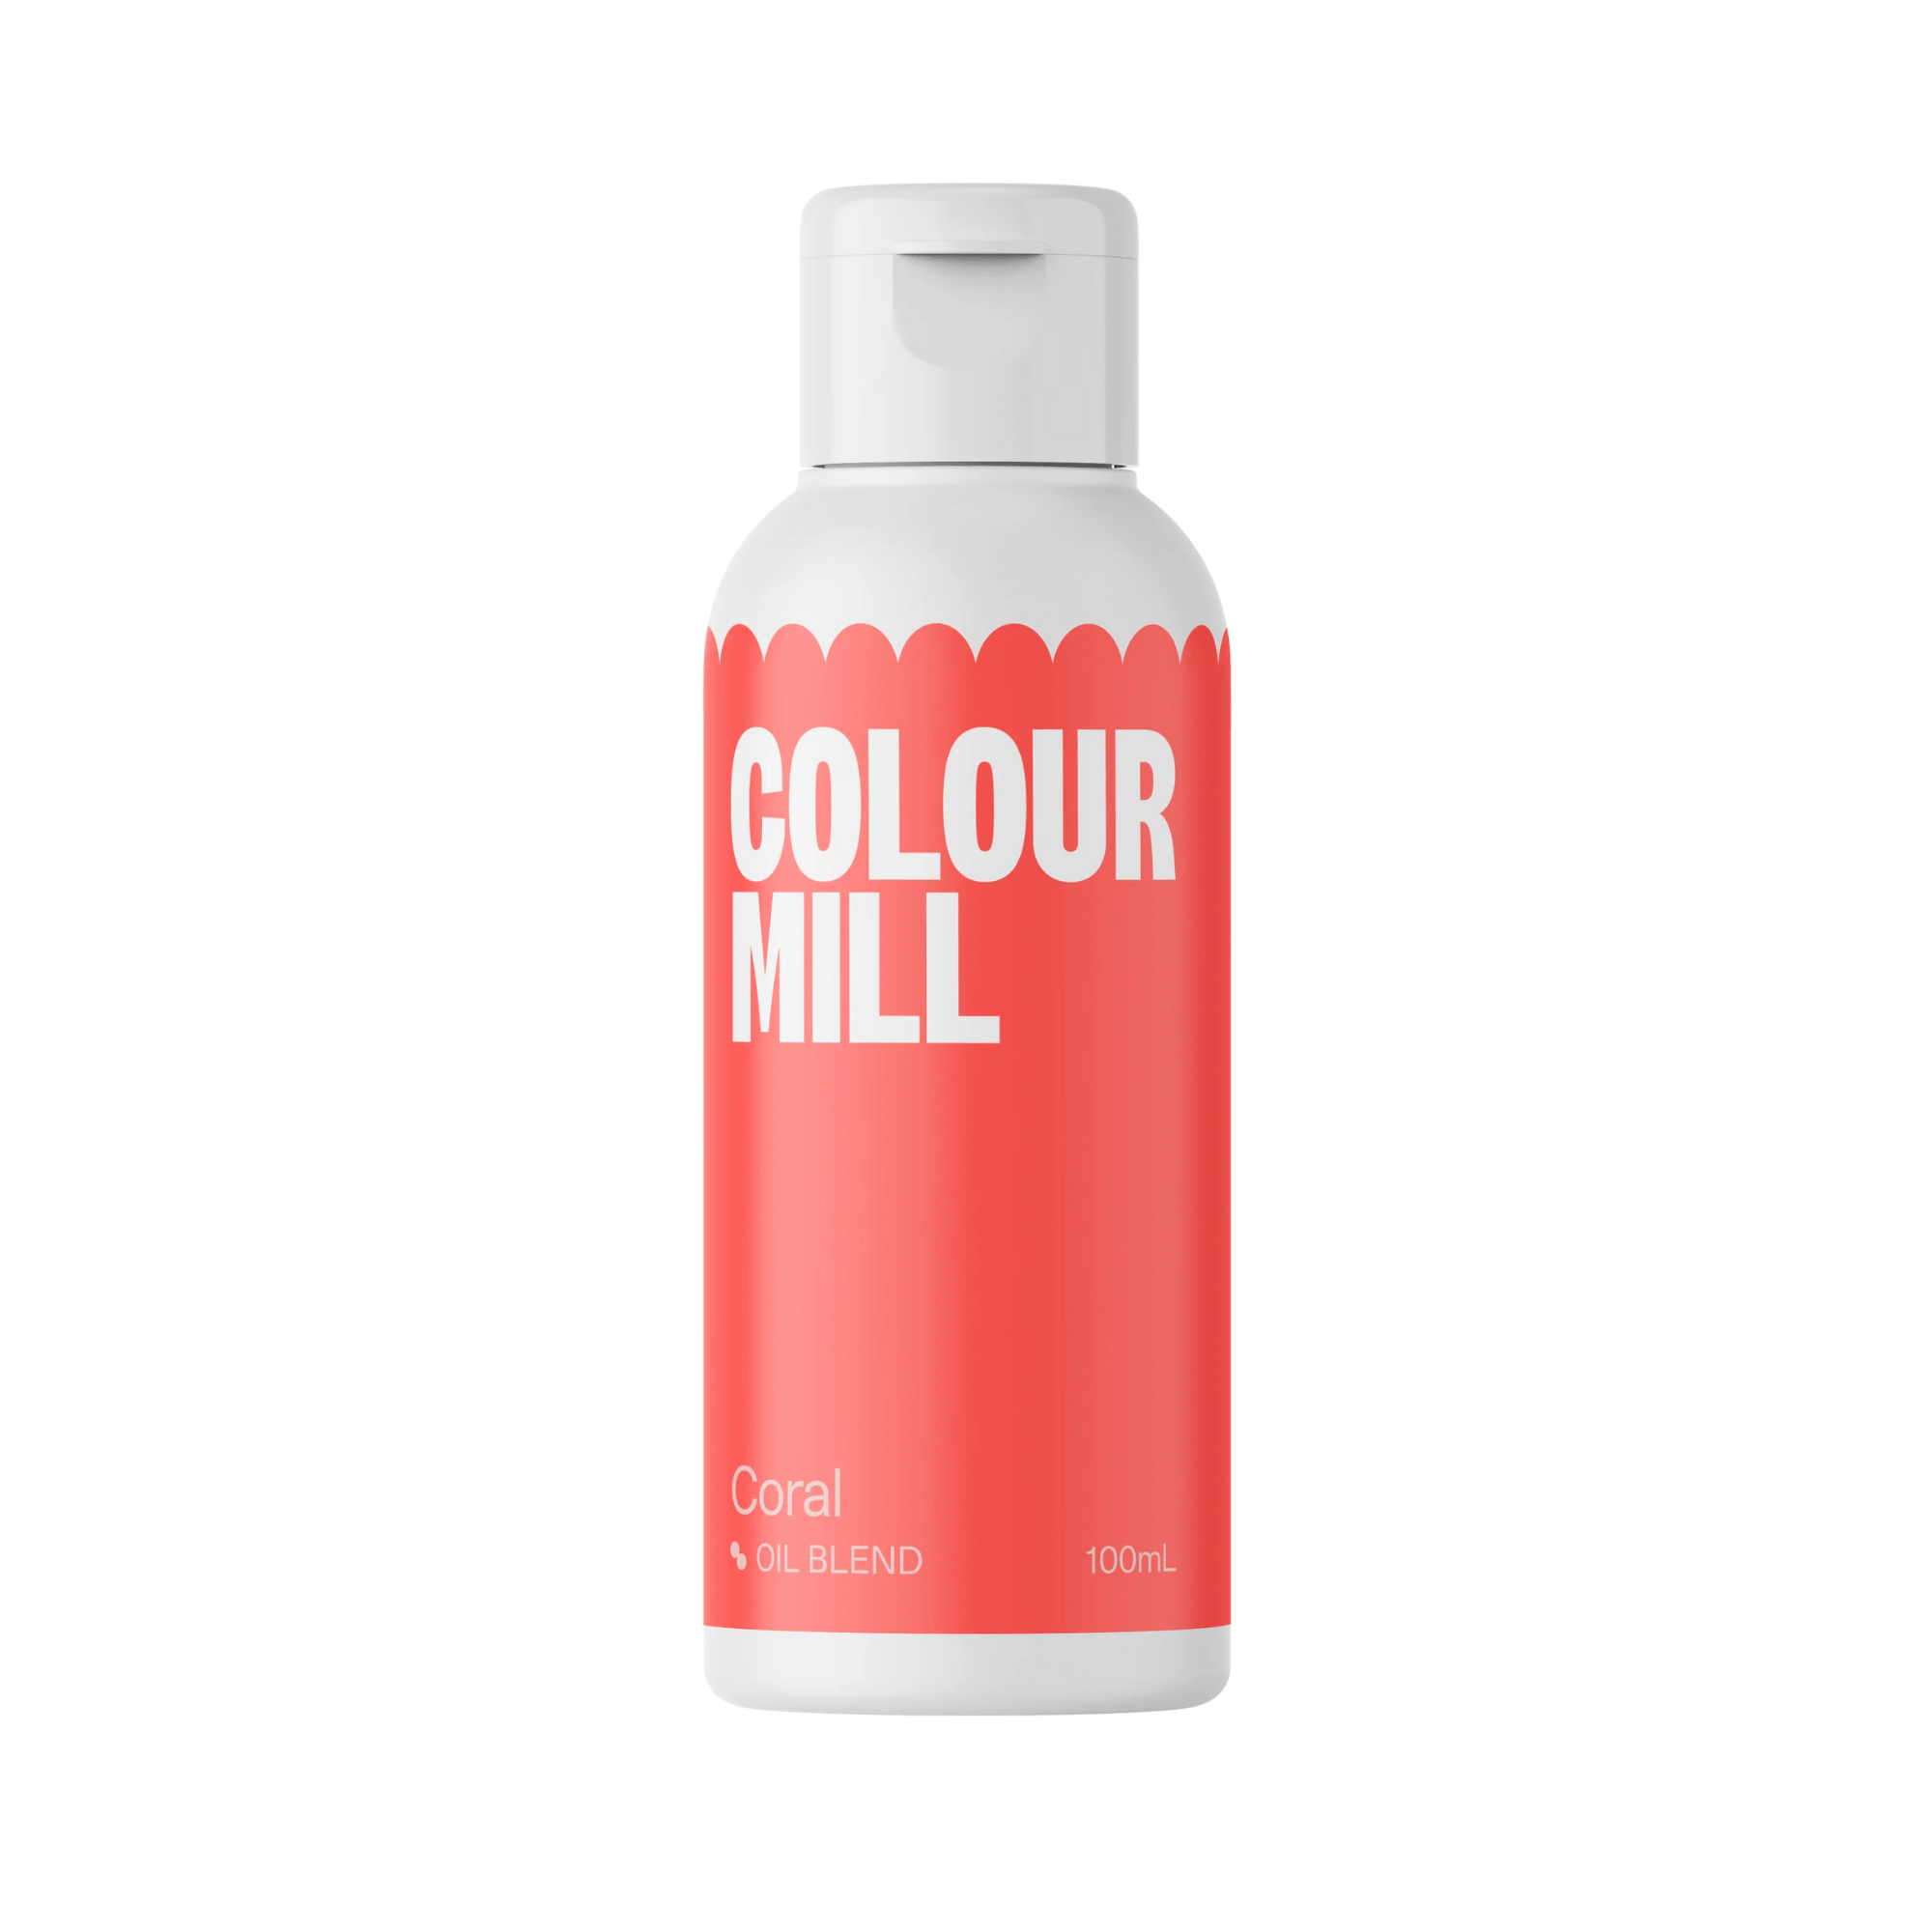 Happy Sprinkles Streusel 100ml Colour Mill Coral - Oil Blend